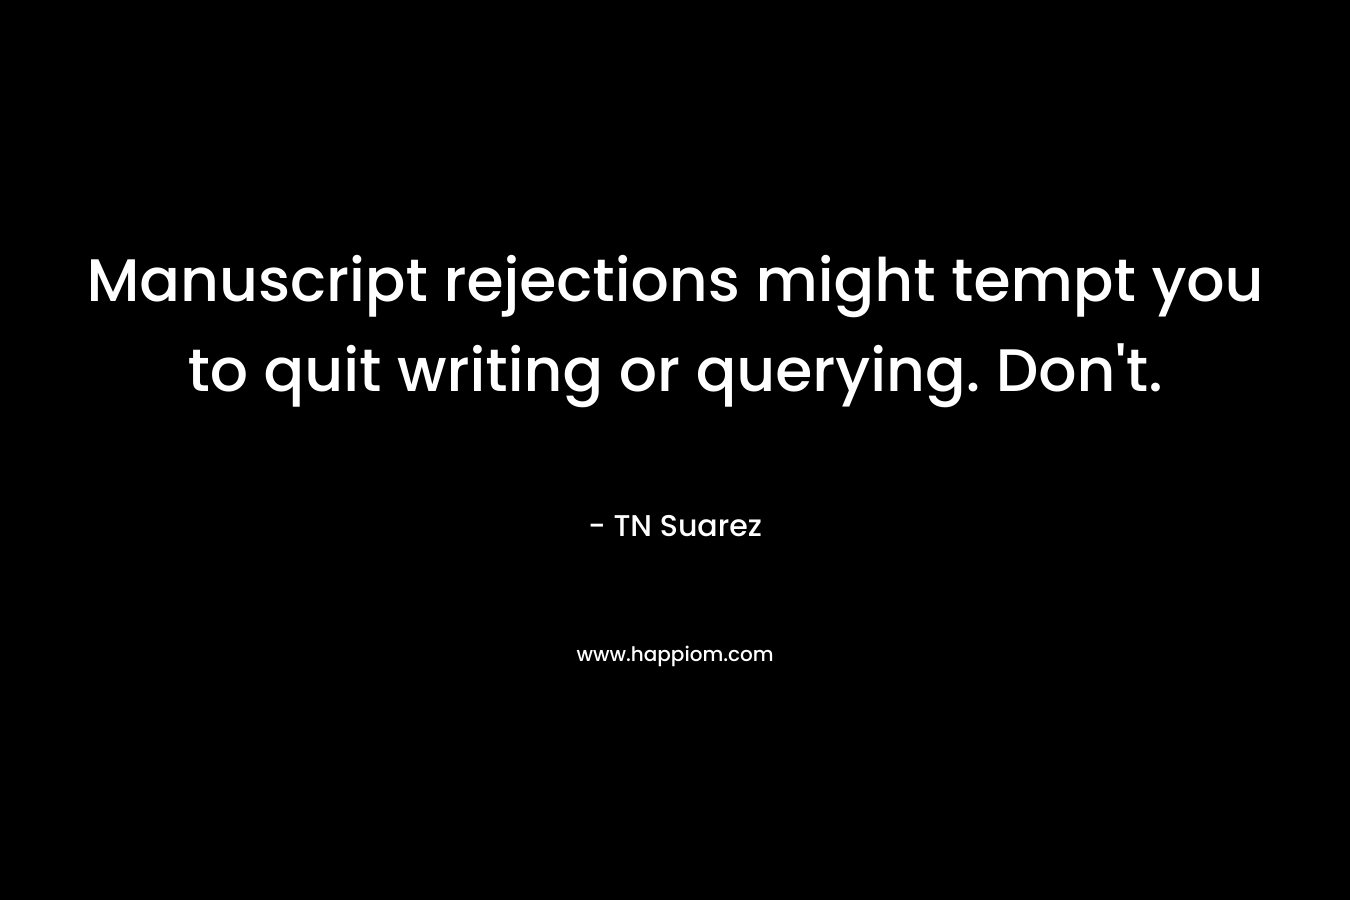 Manuscript rejections might tempt you to quit writing or querying. Don’t. – TN Suarez